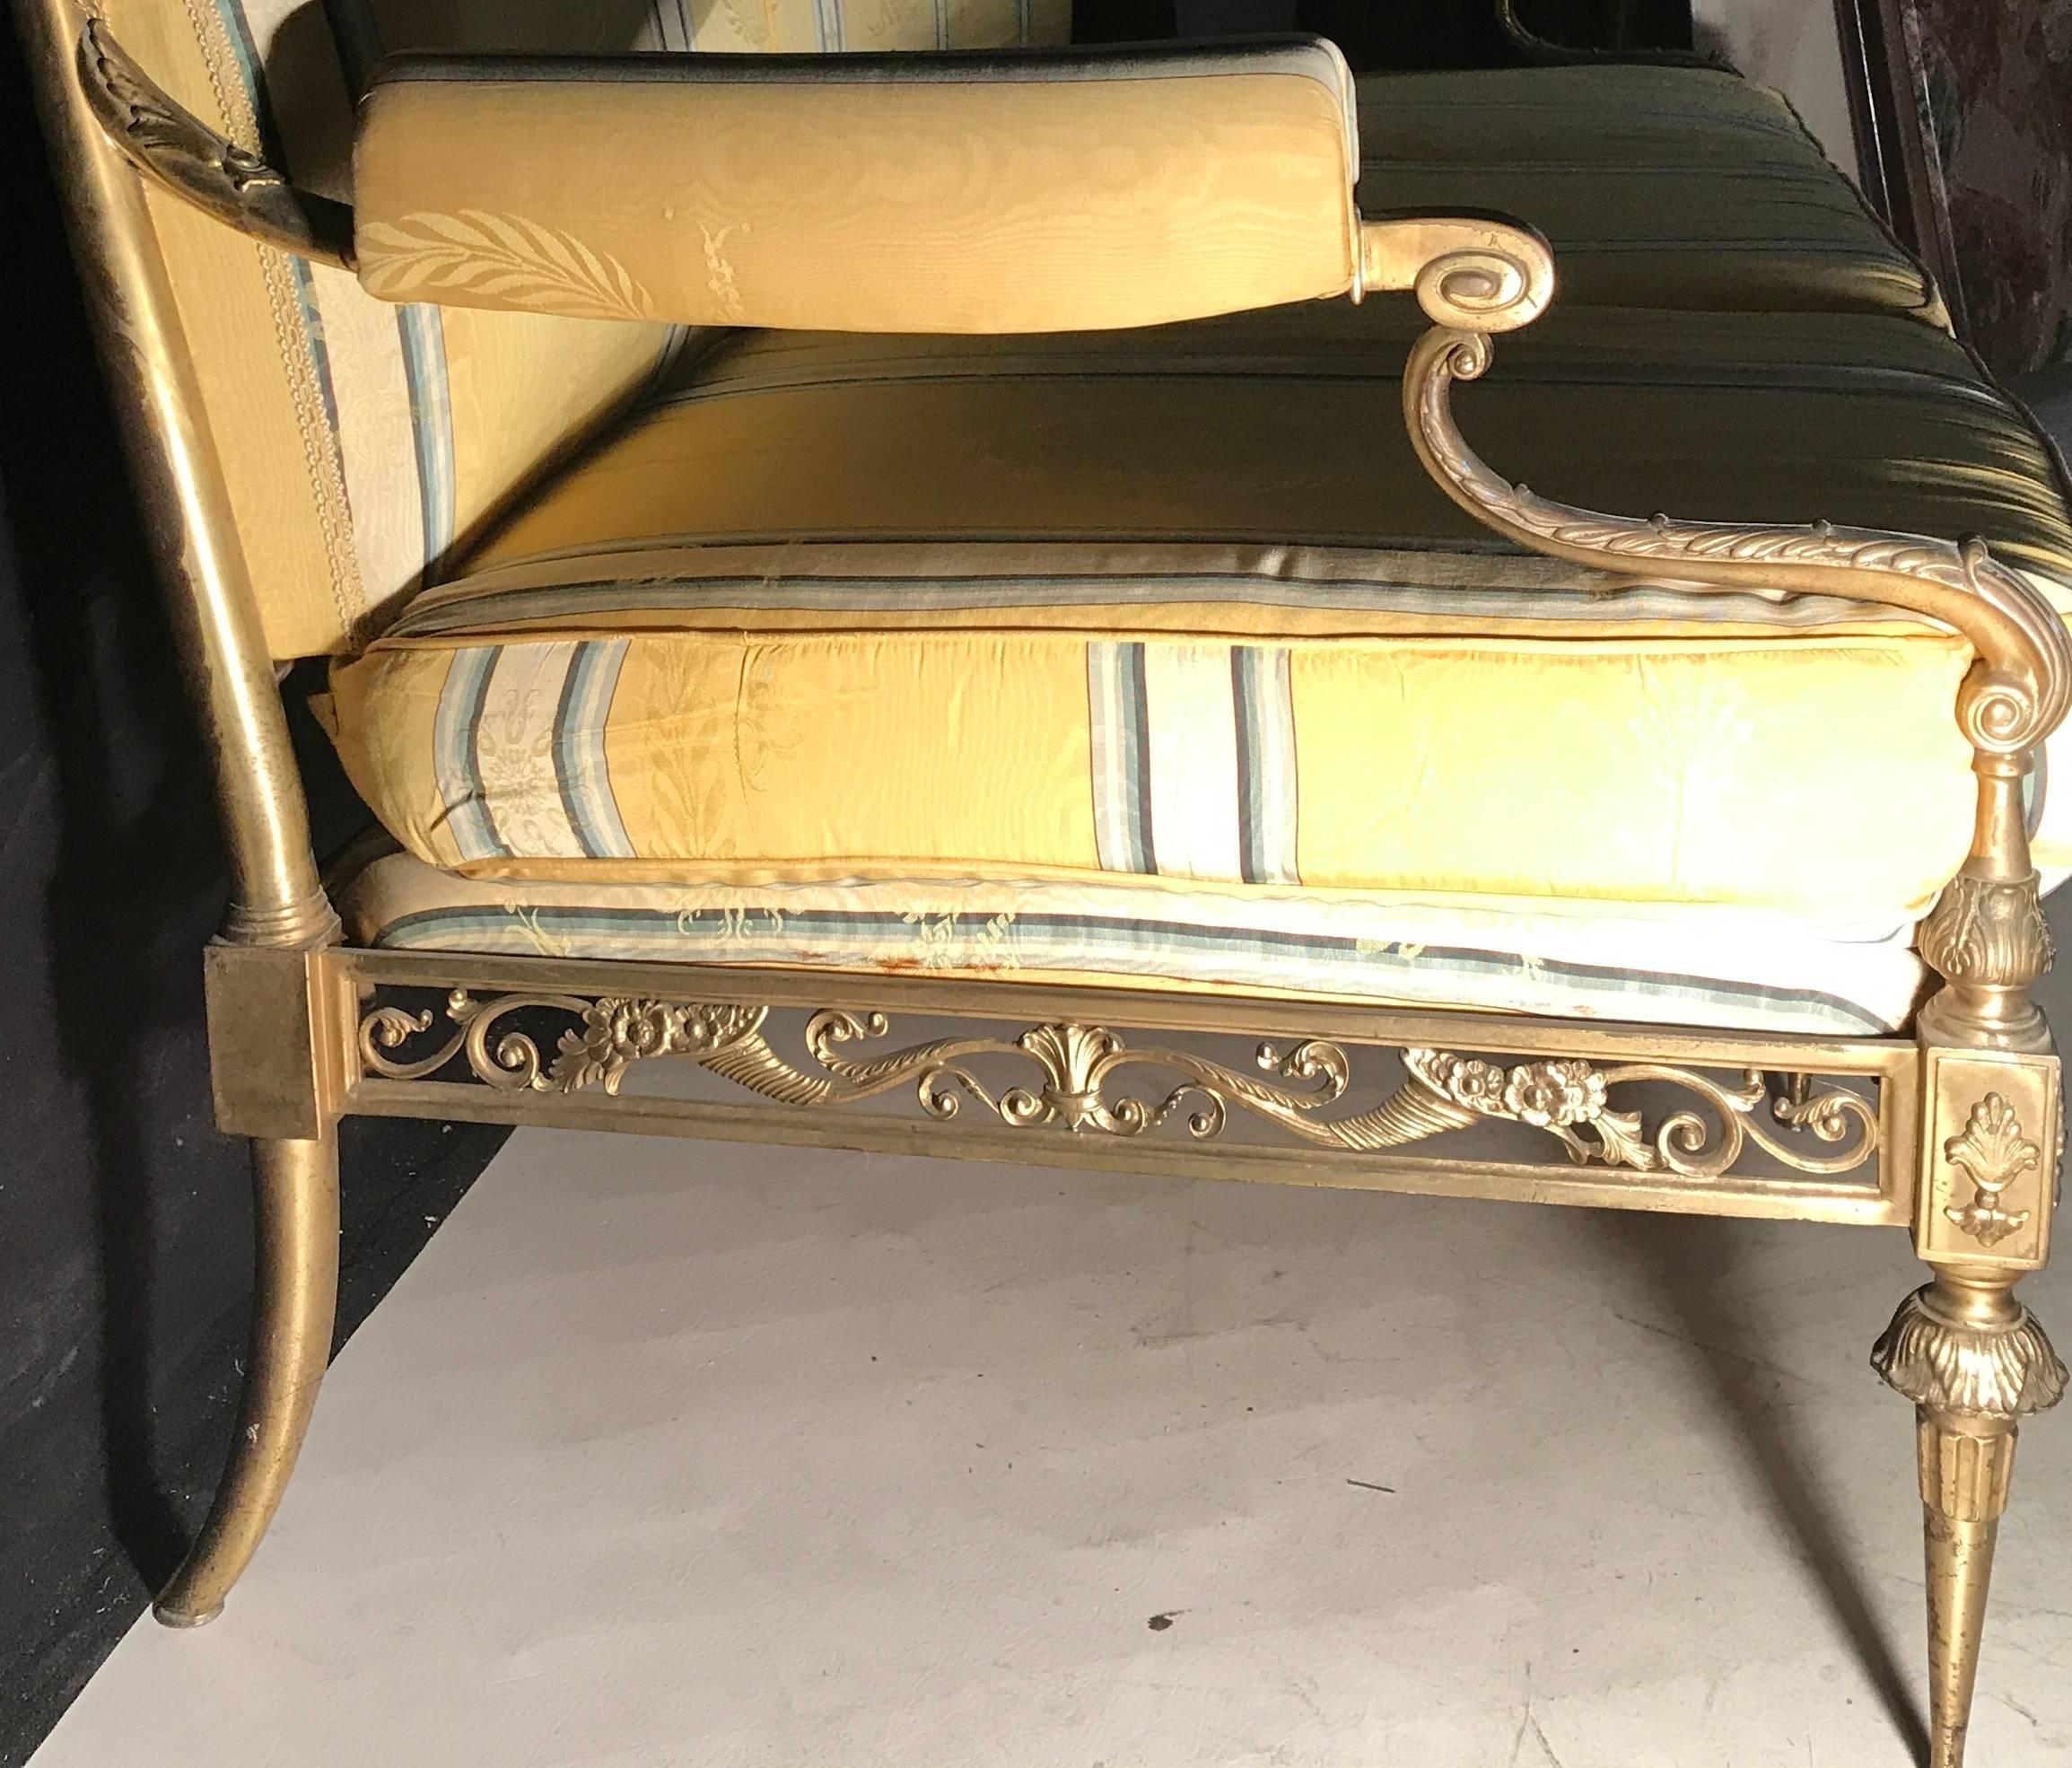 Exceptional Italian gilt bronze sofa with yellow silk upholstery.
The pair of armchairs are also available.